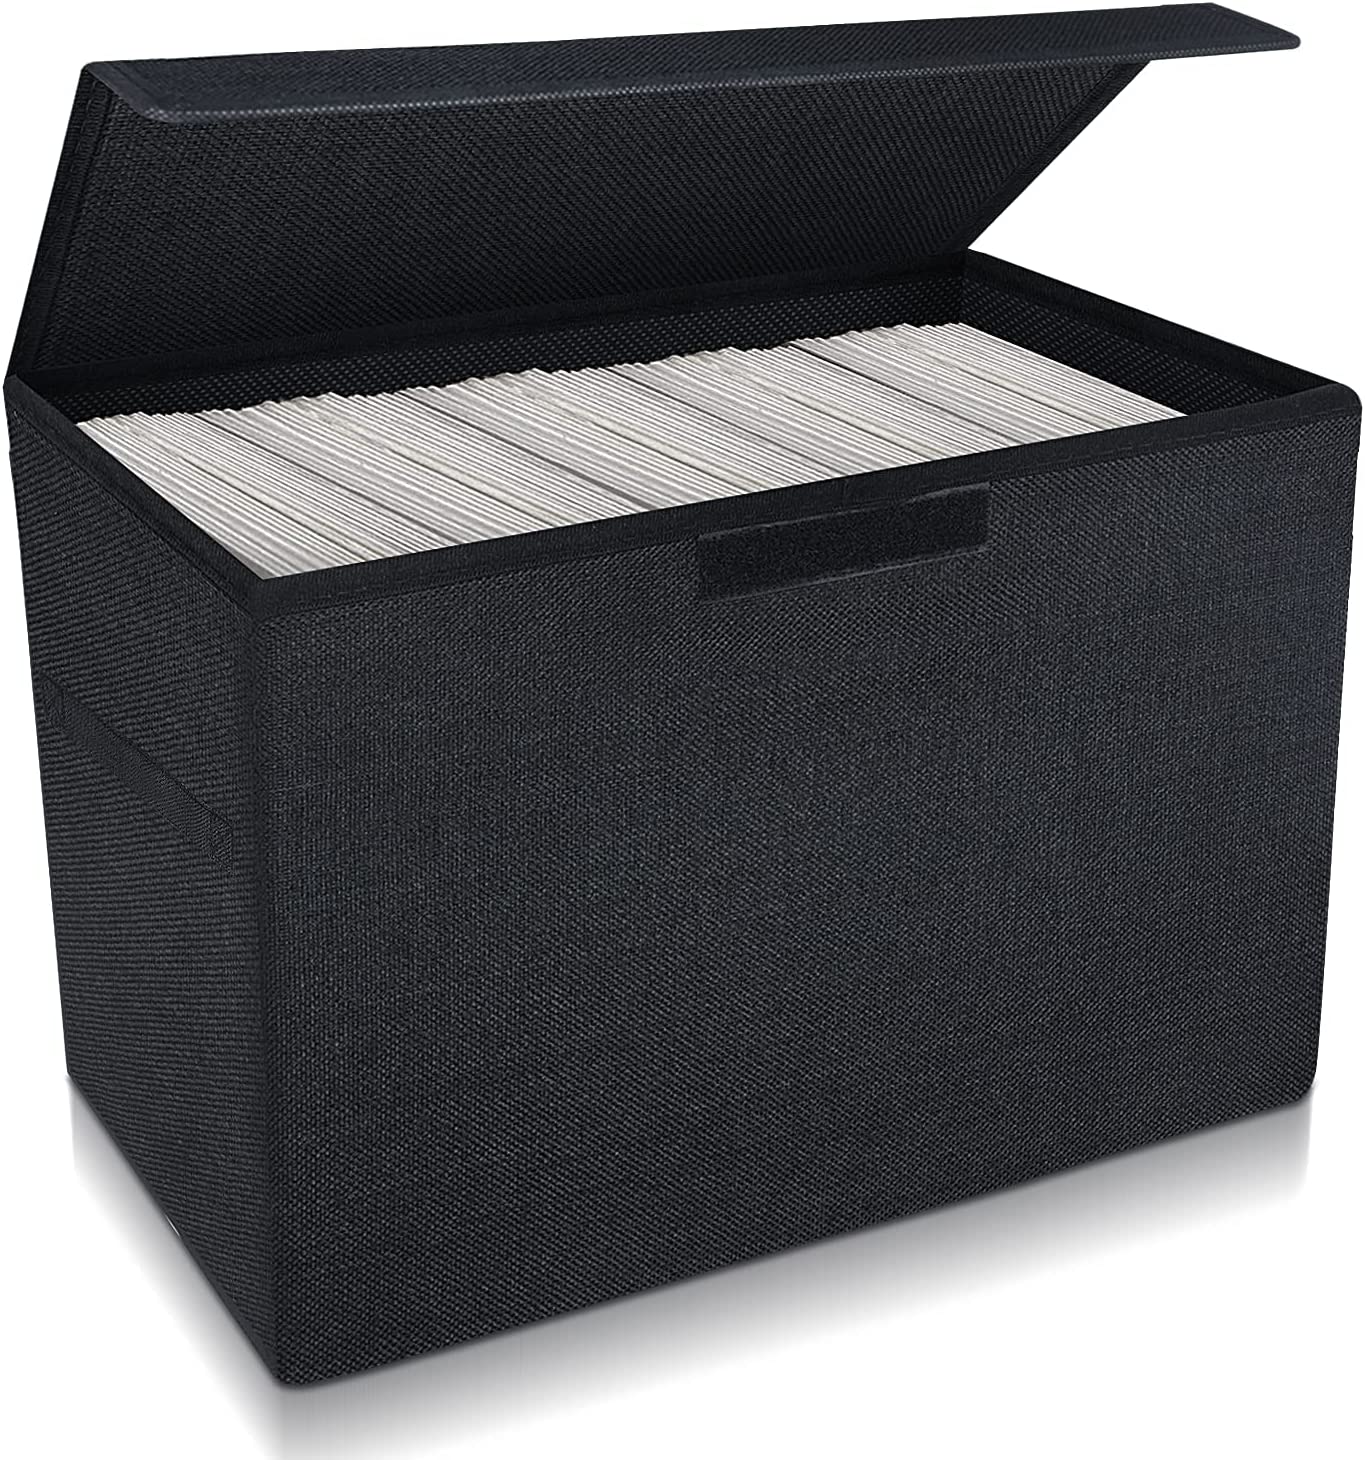 Leffis Water Resistant Easy Install Book Storage Box